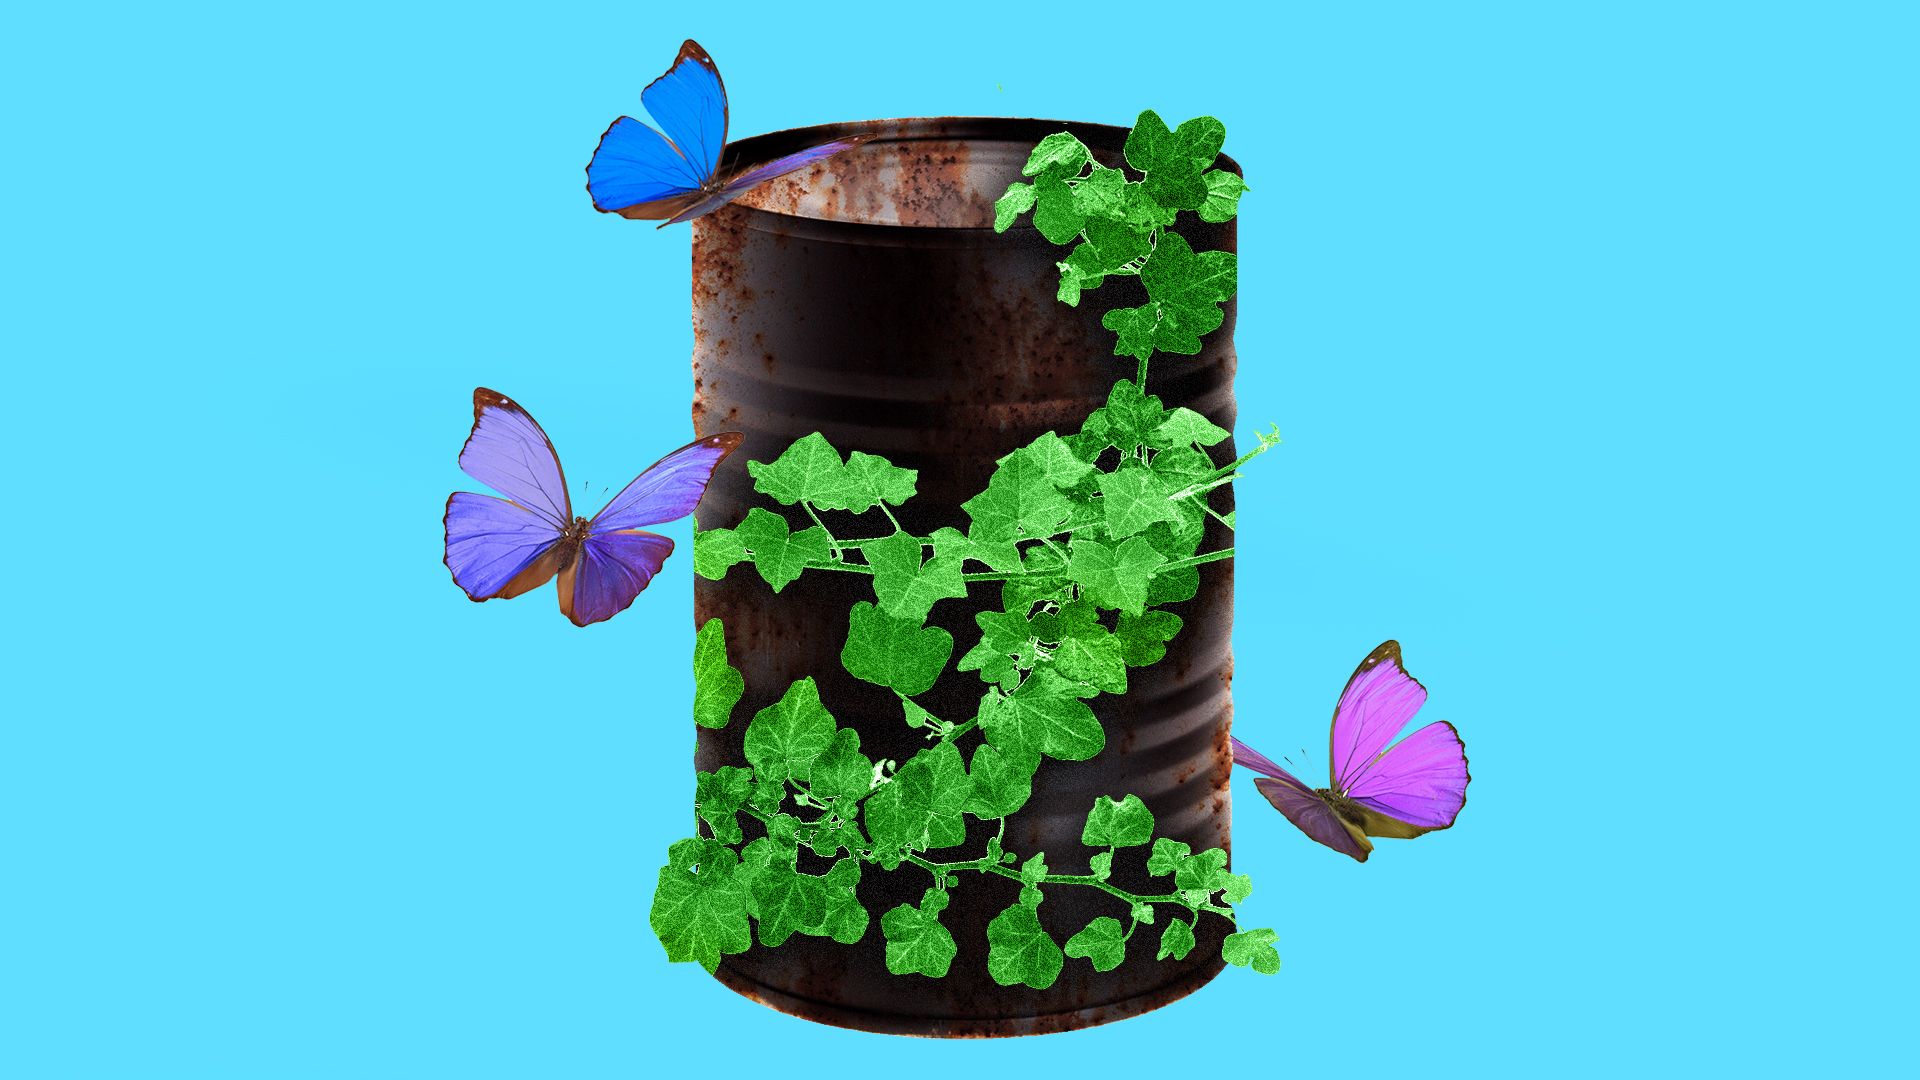 Oil barrel with plants and butterflies